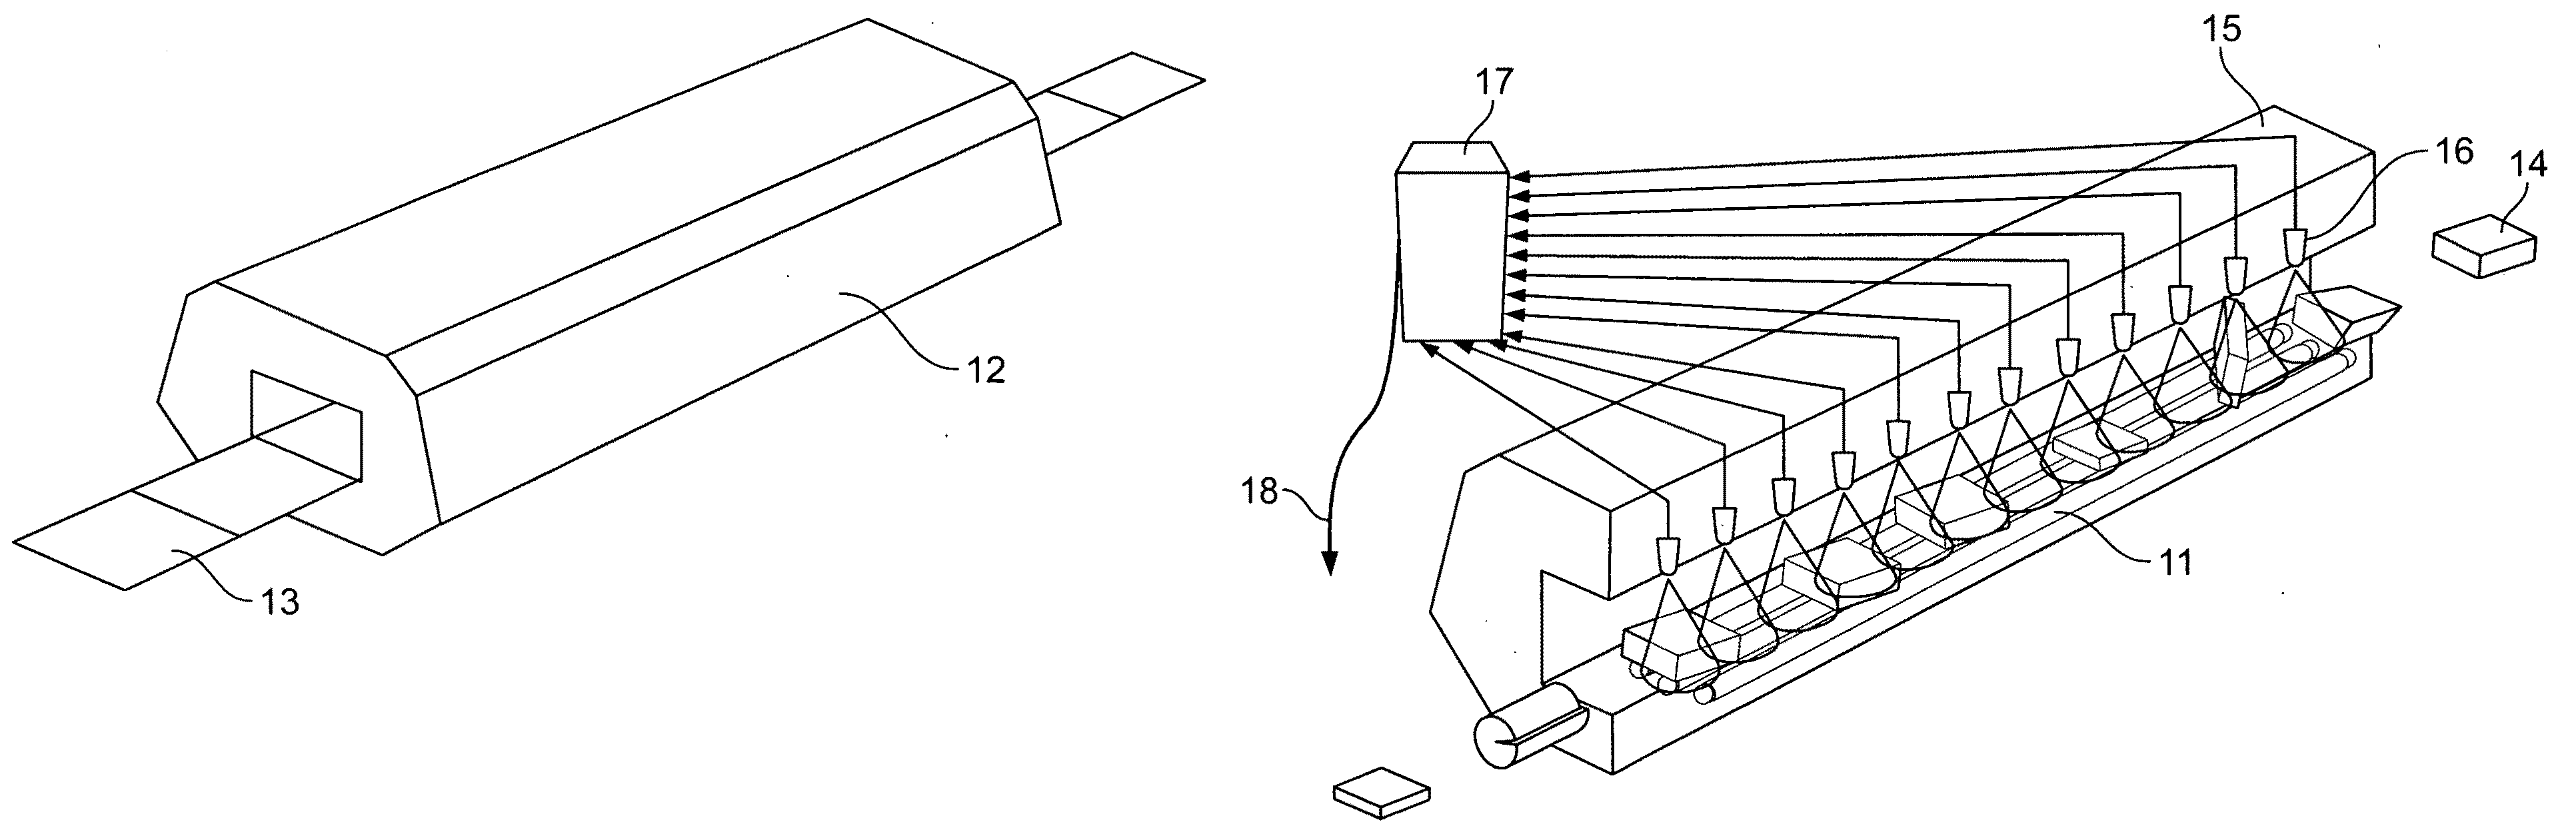 Process for neutron interrogation of objects in relative motion or of large extent